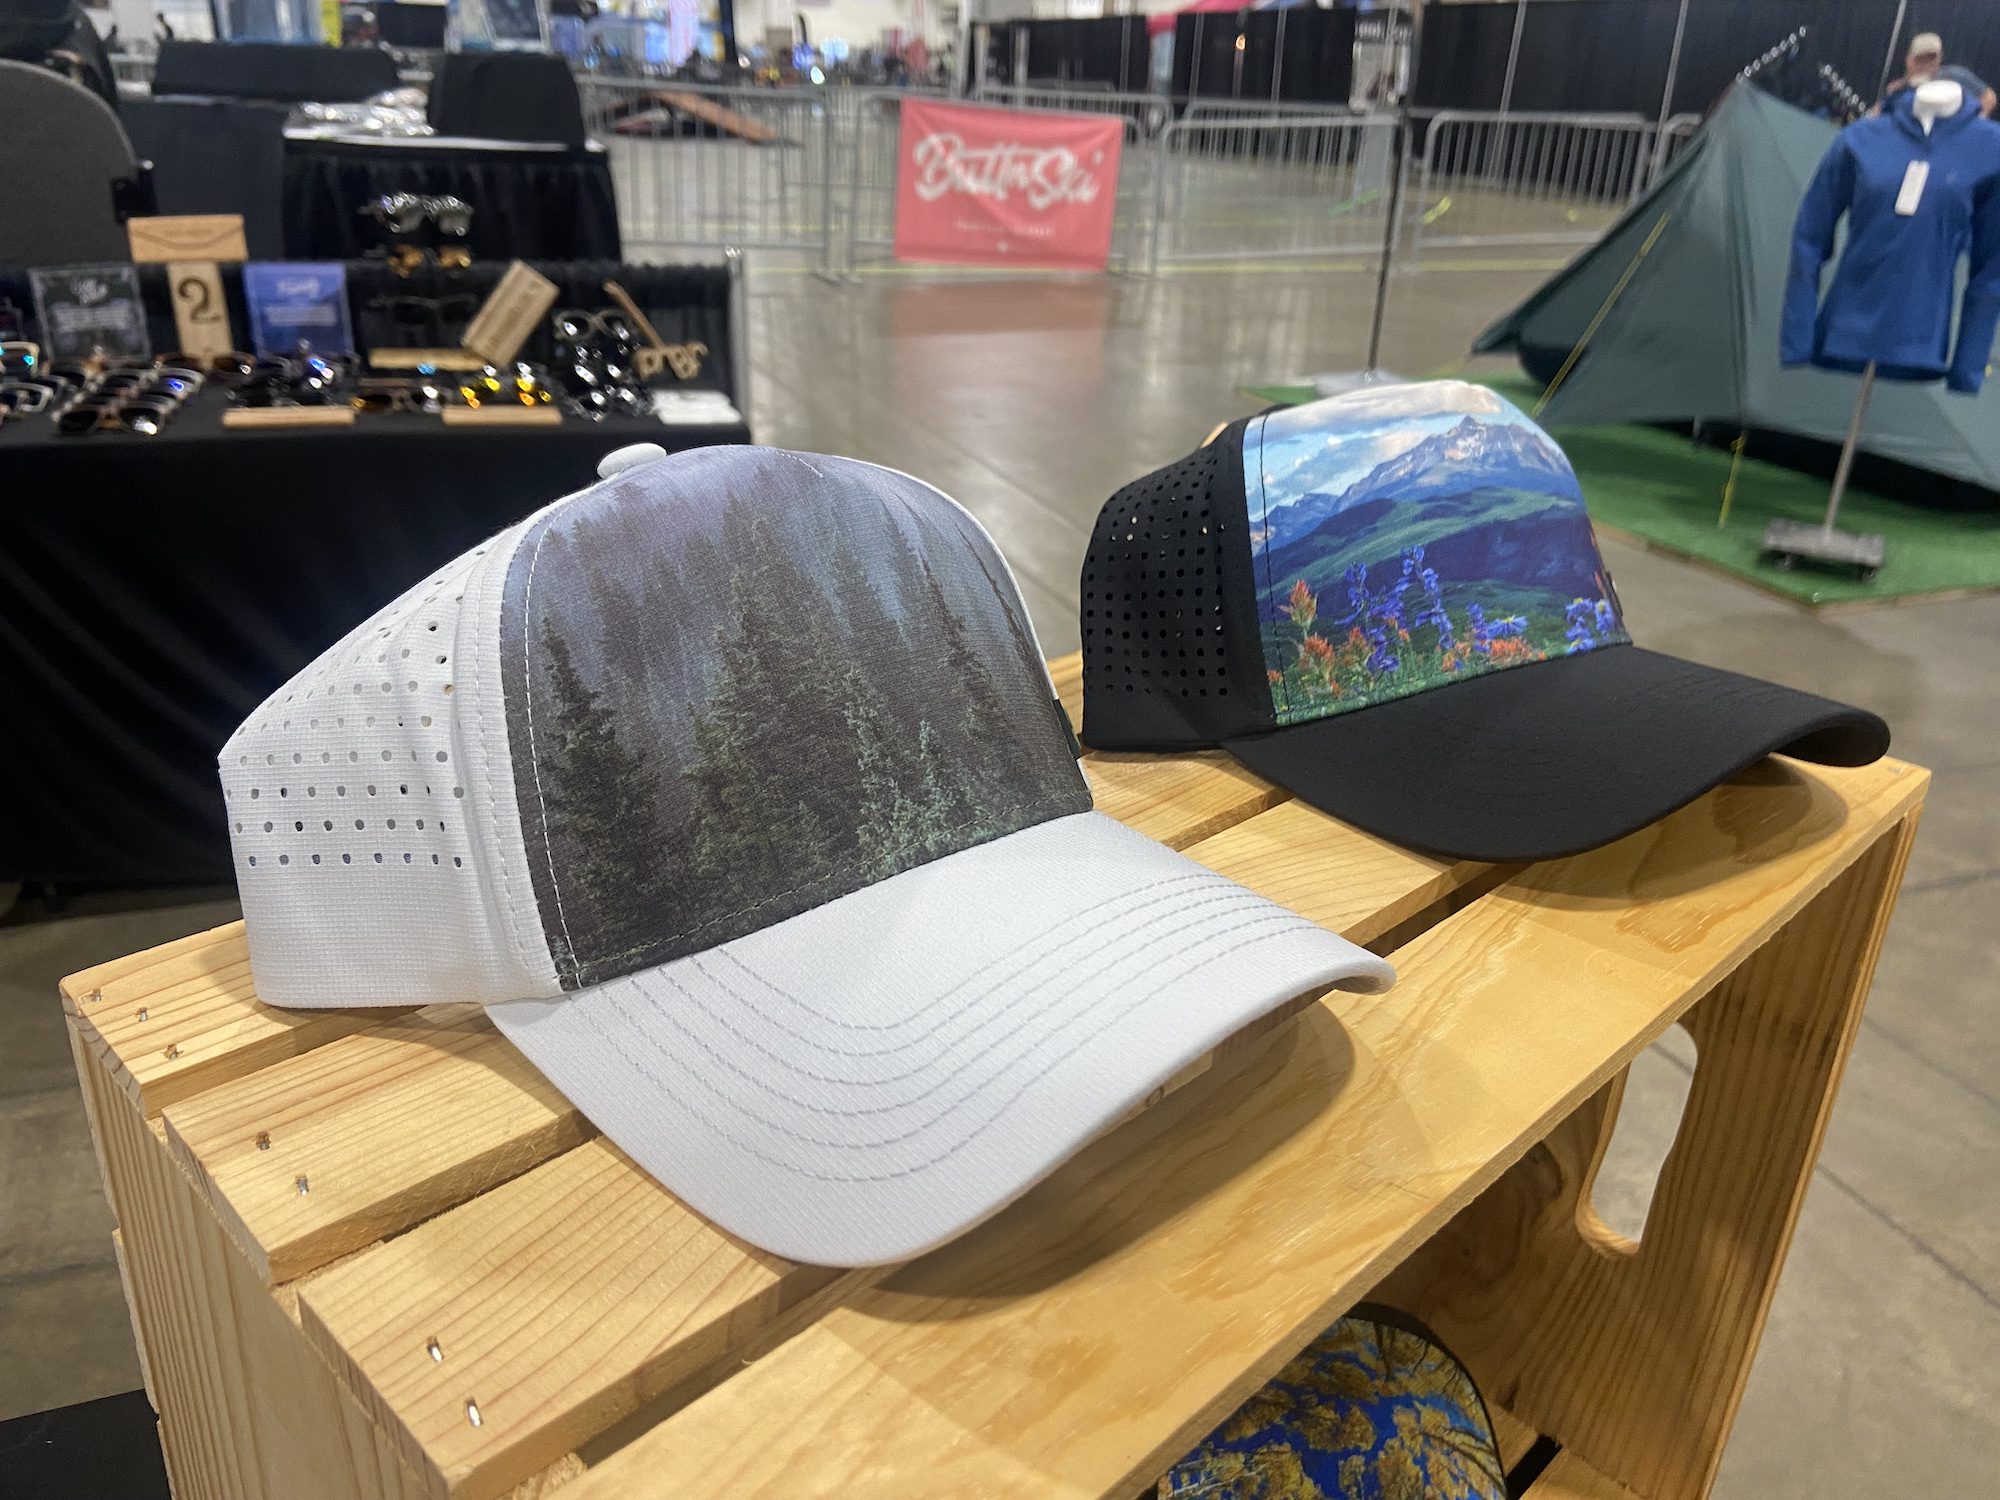 Gear That Caught Our Eye at the Big Gear Show - IMG 1737